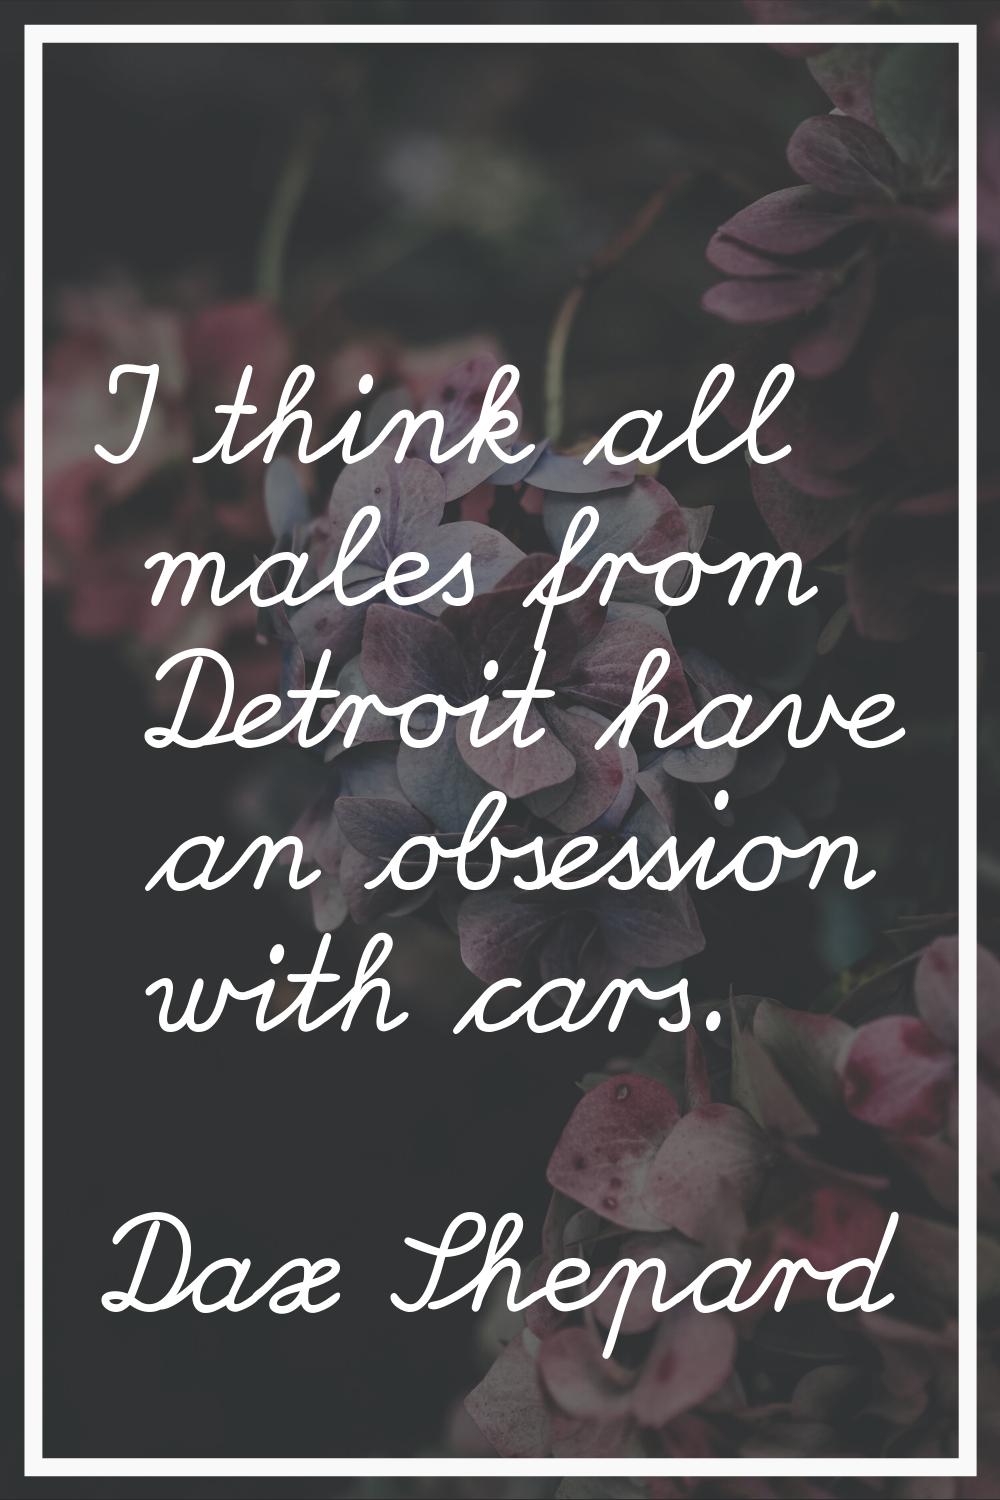 I think all males from Detroit have an obsession with cars.